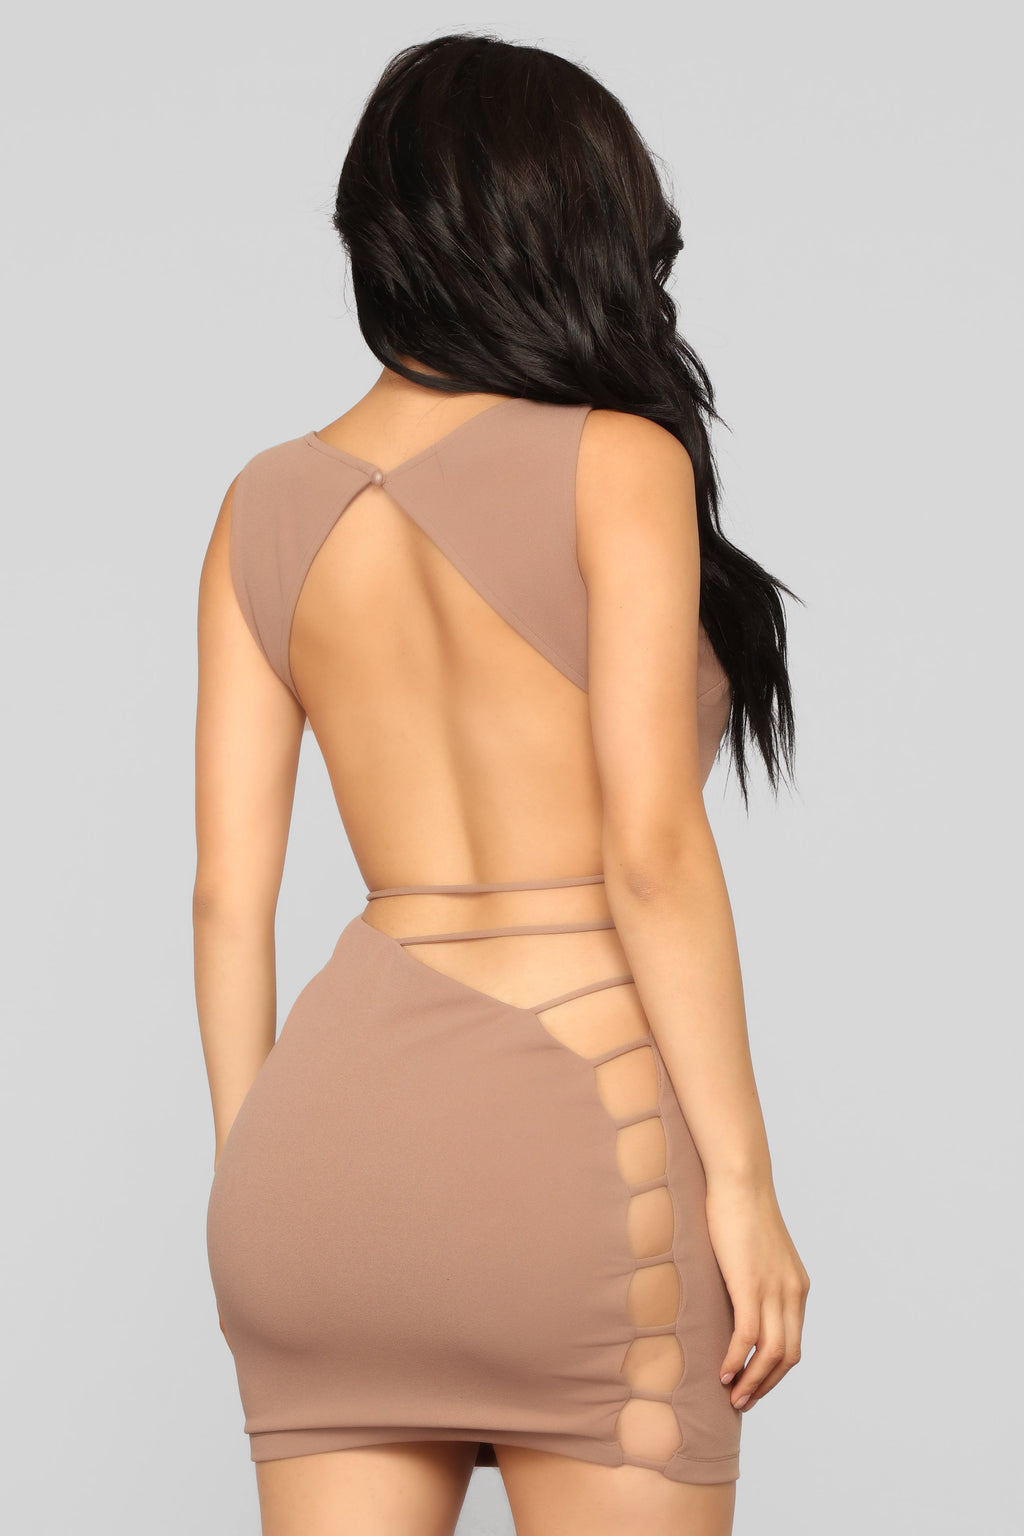 All Up In The Club Dress - Mocha